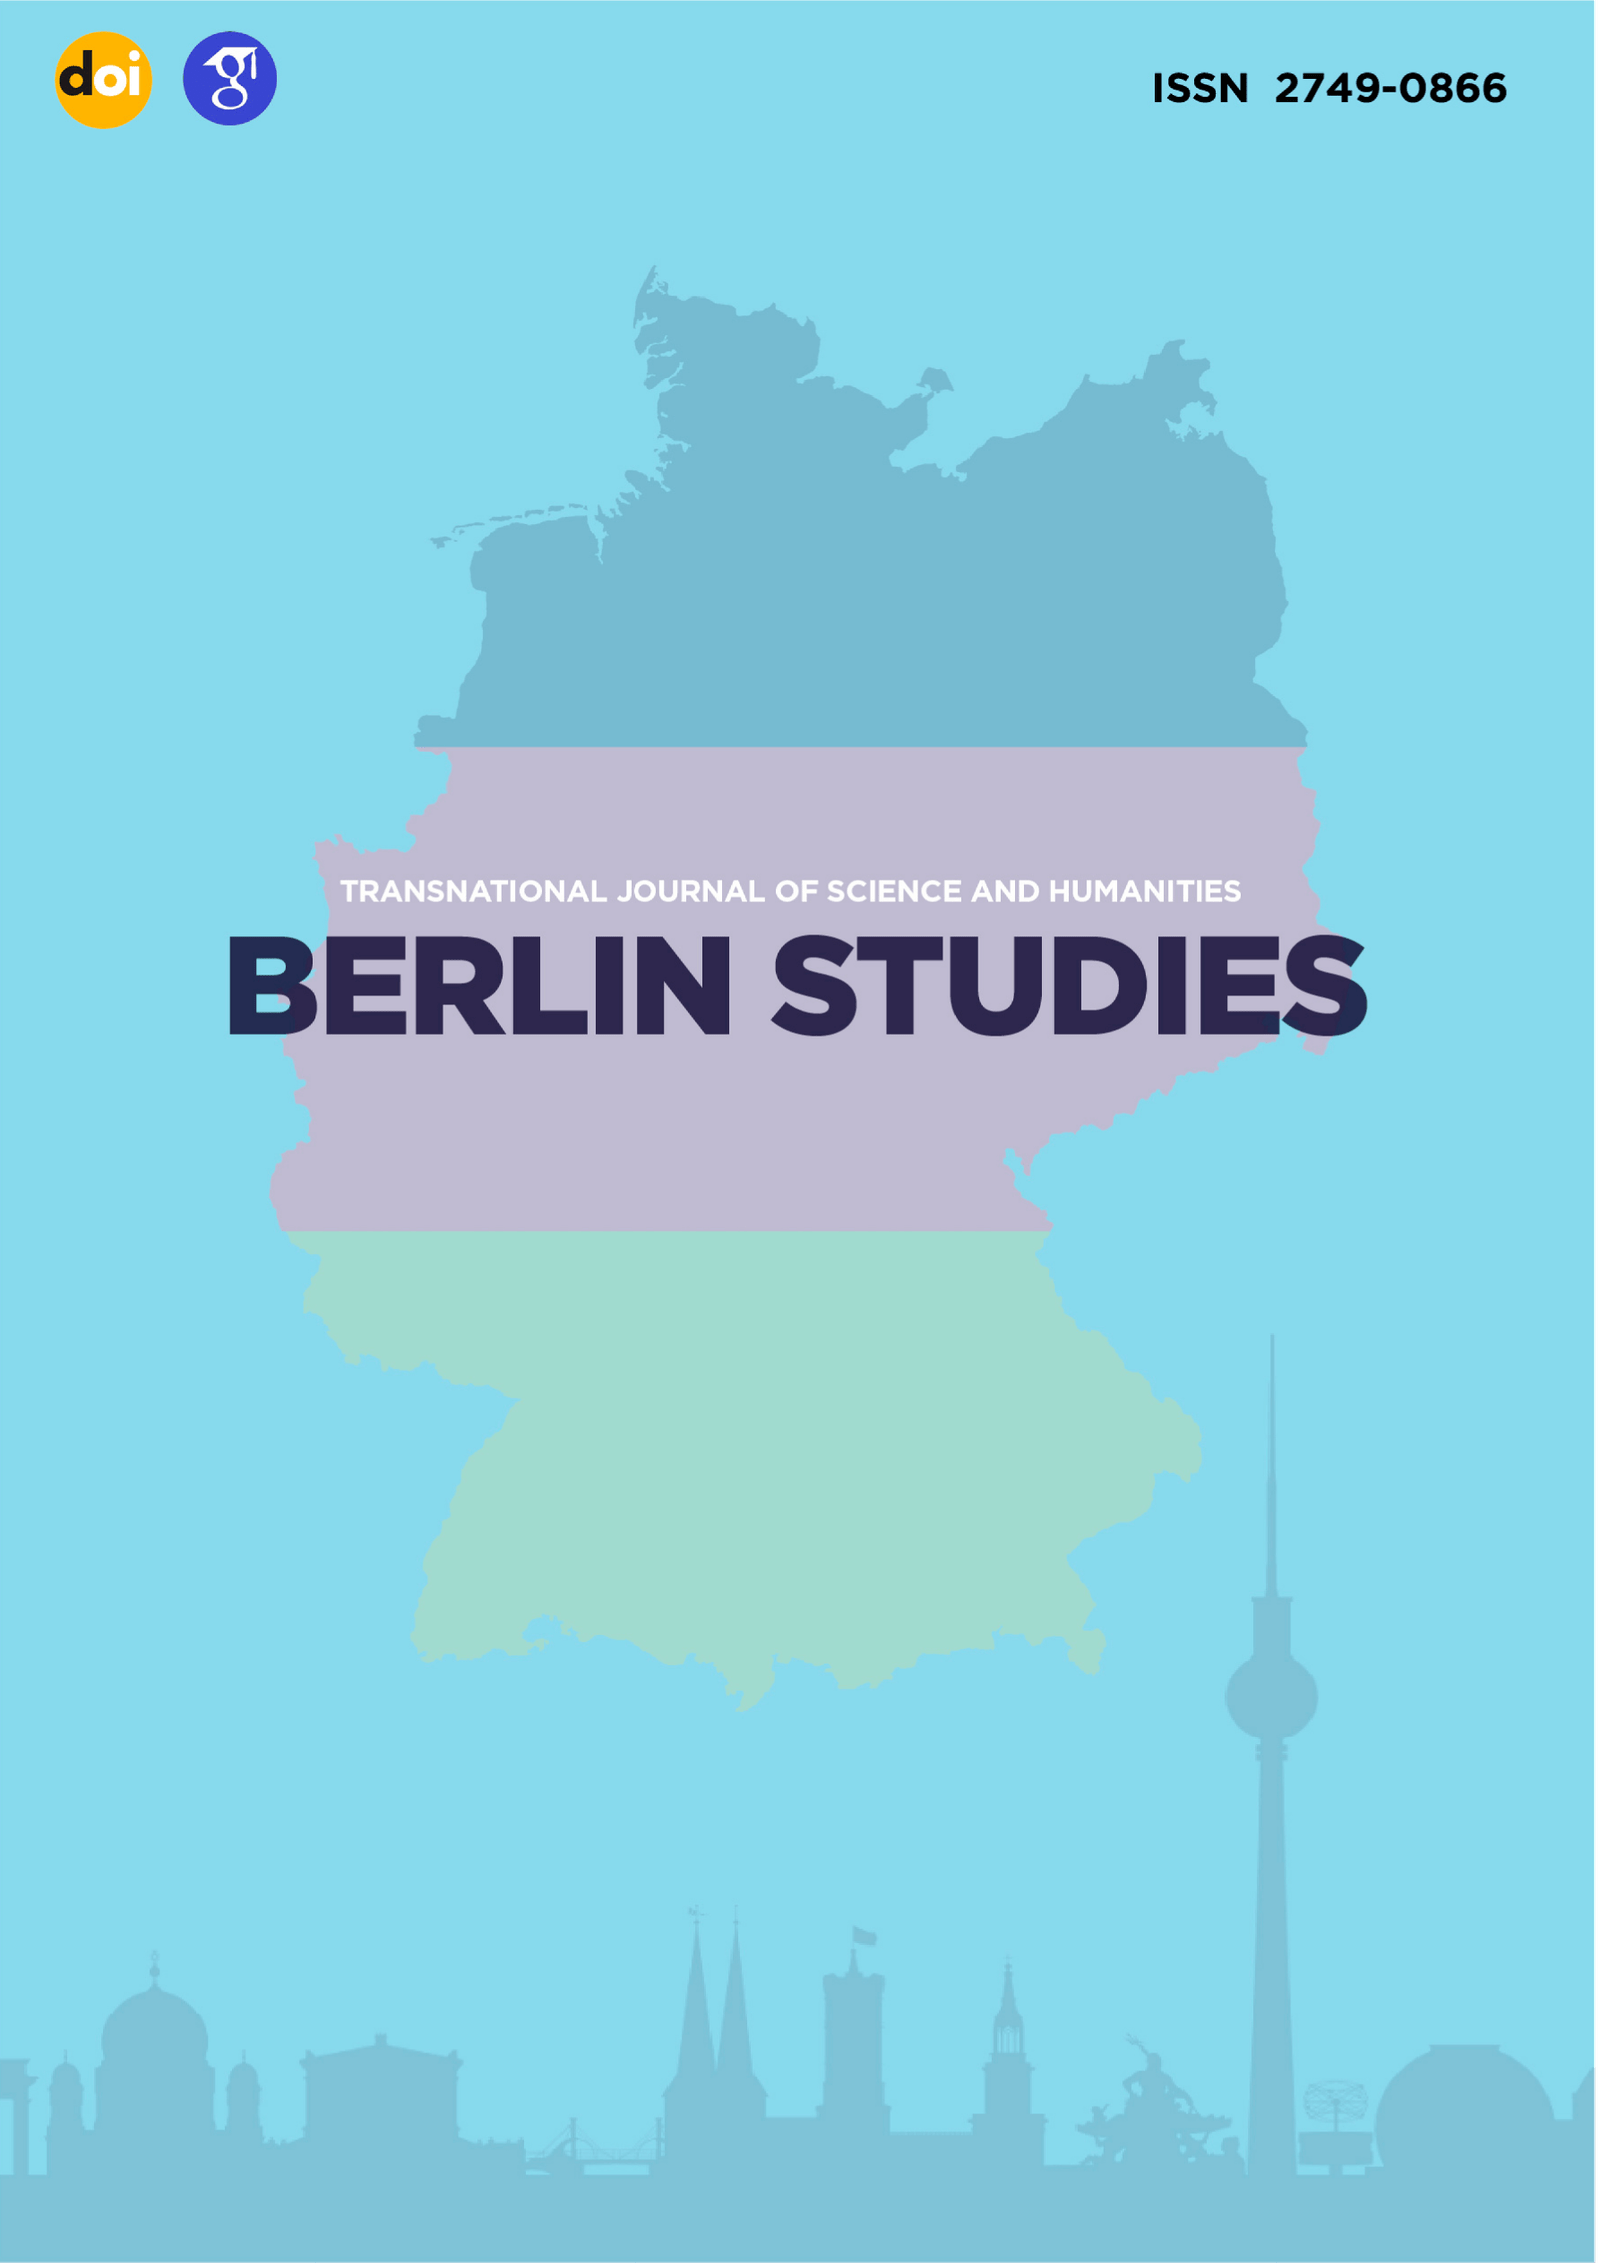 					View Vol. 3 No. 1.8 Political sciences (2023): Berlin Studies Transnational Journal of Science and Humanities
				